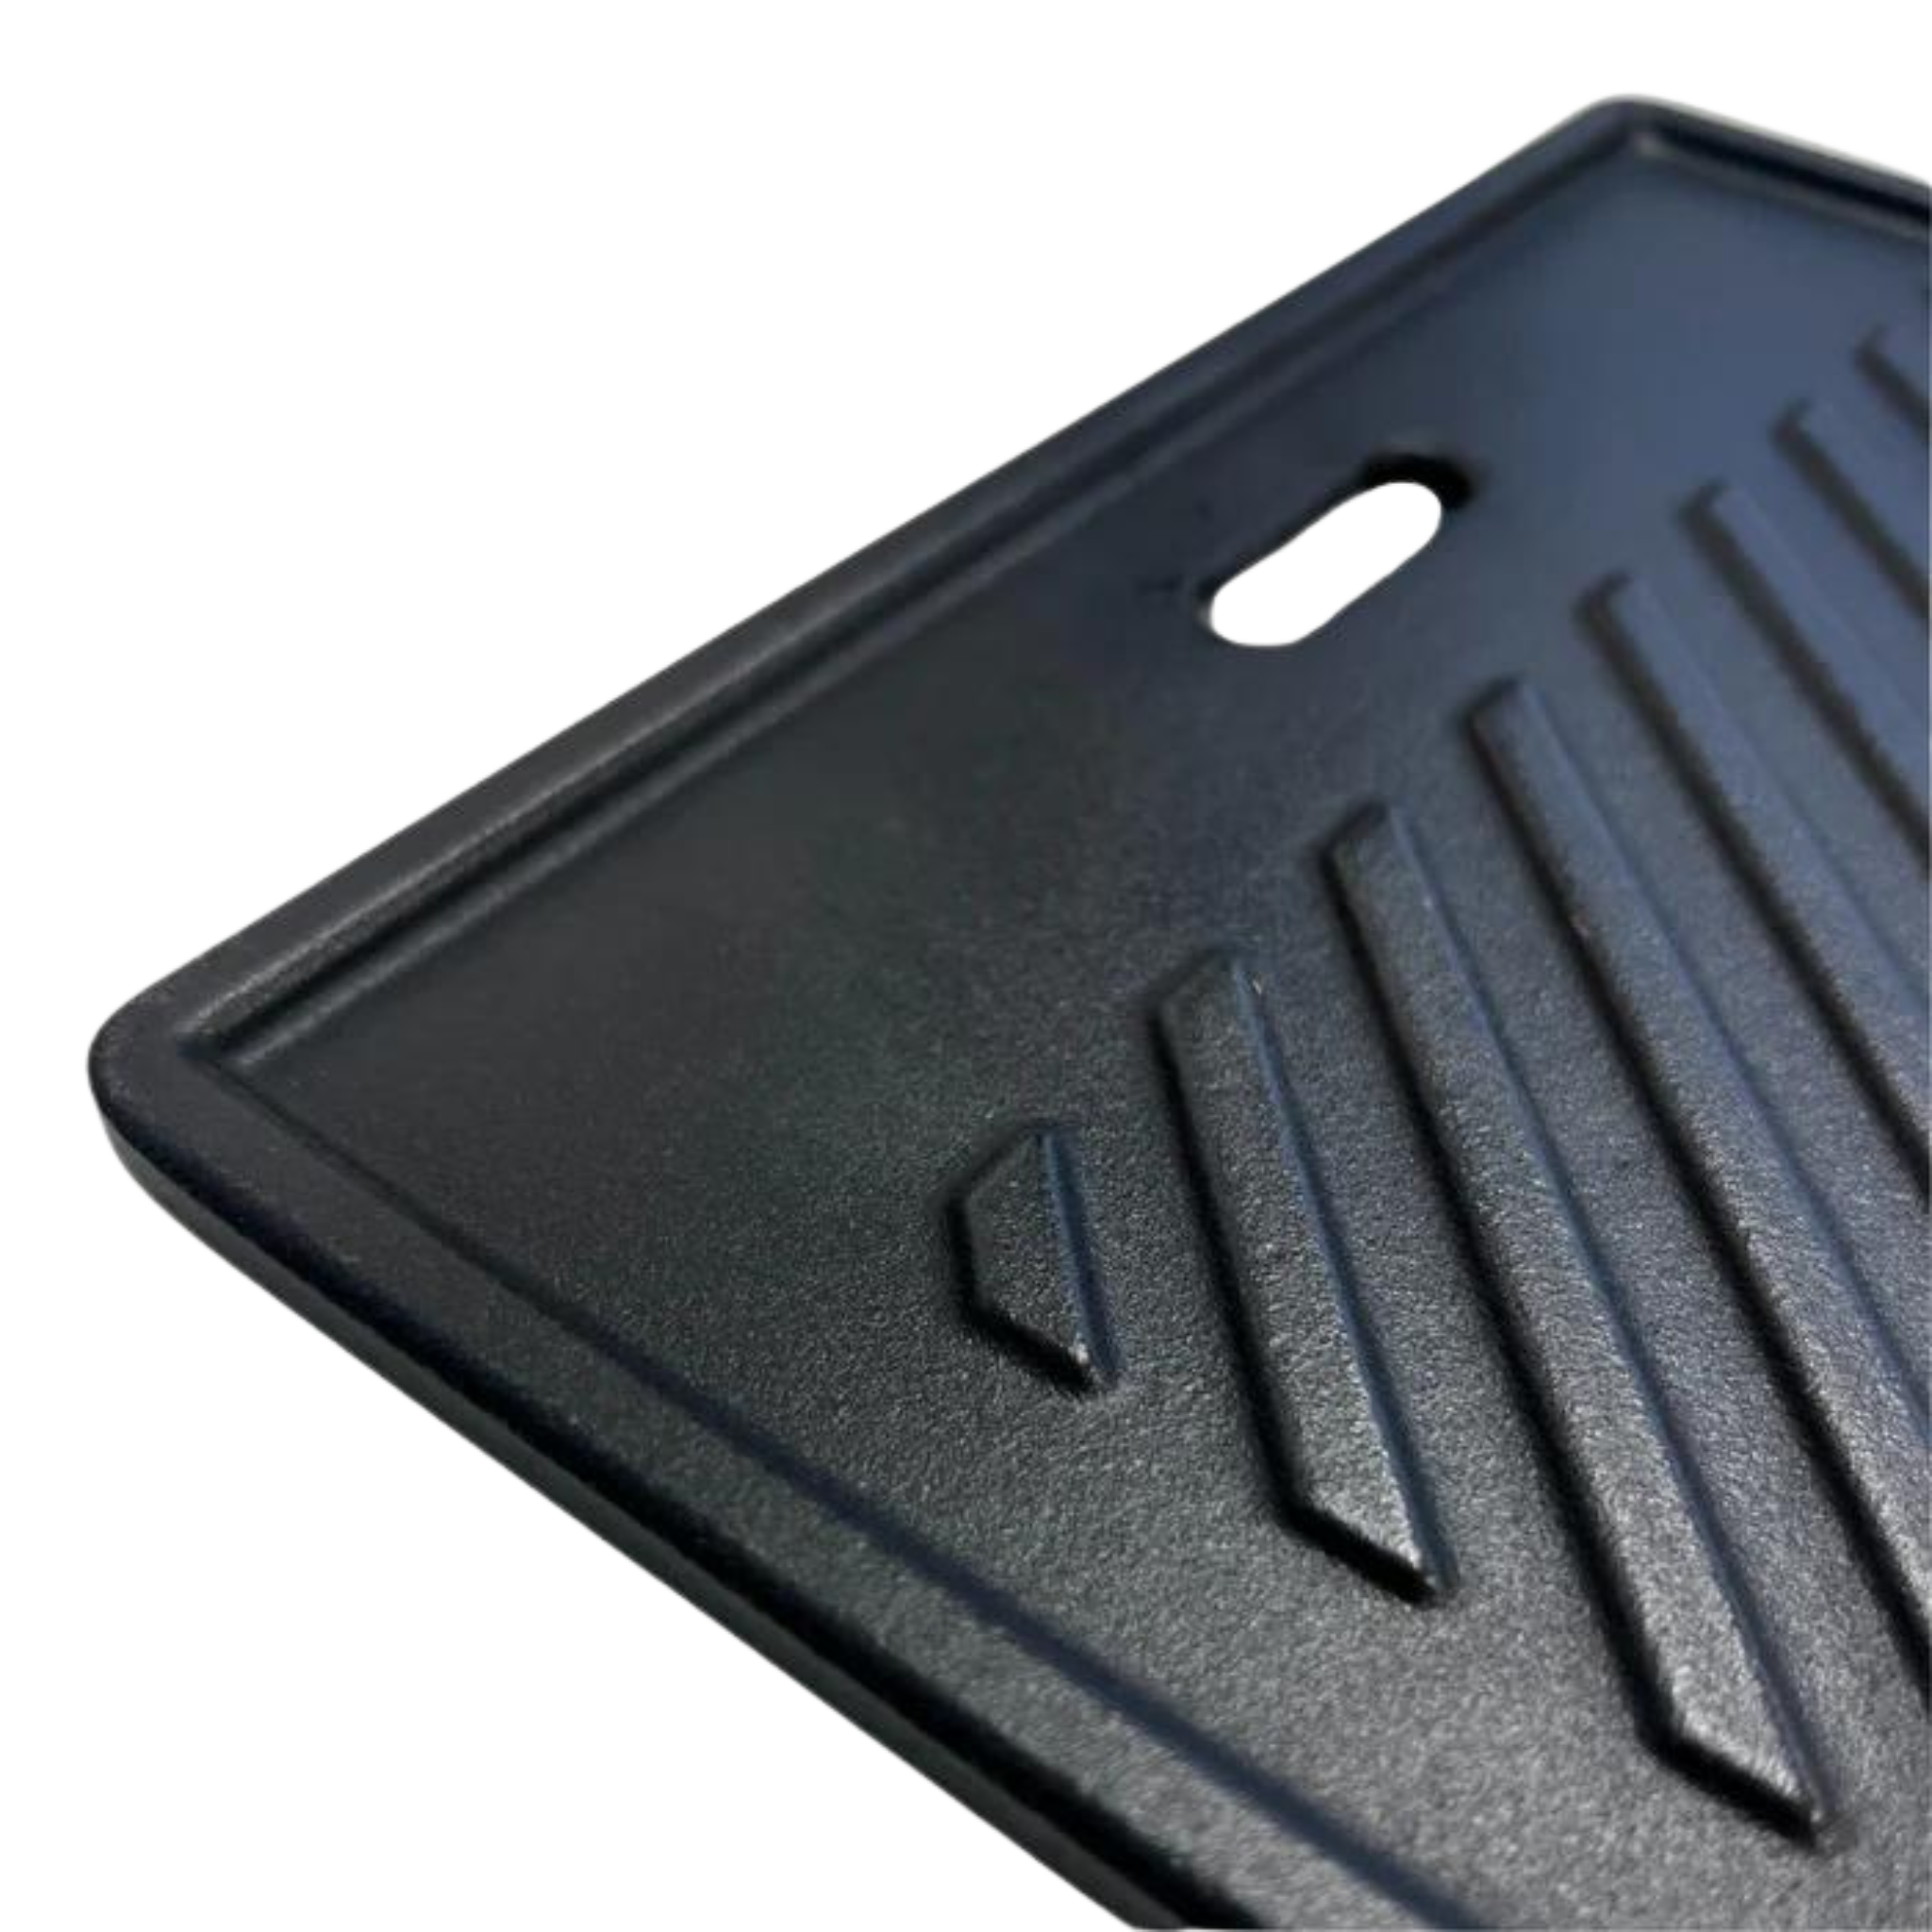 CosmoGrill Cast Iron Grill and Griddle Set for DUO Series